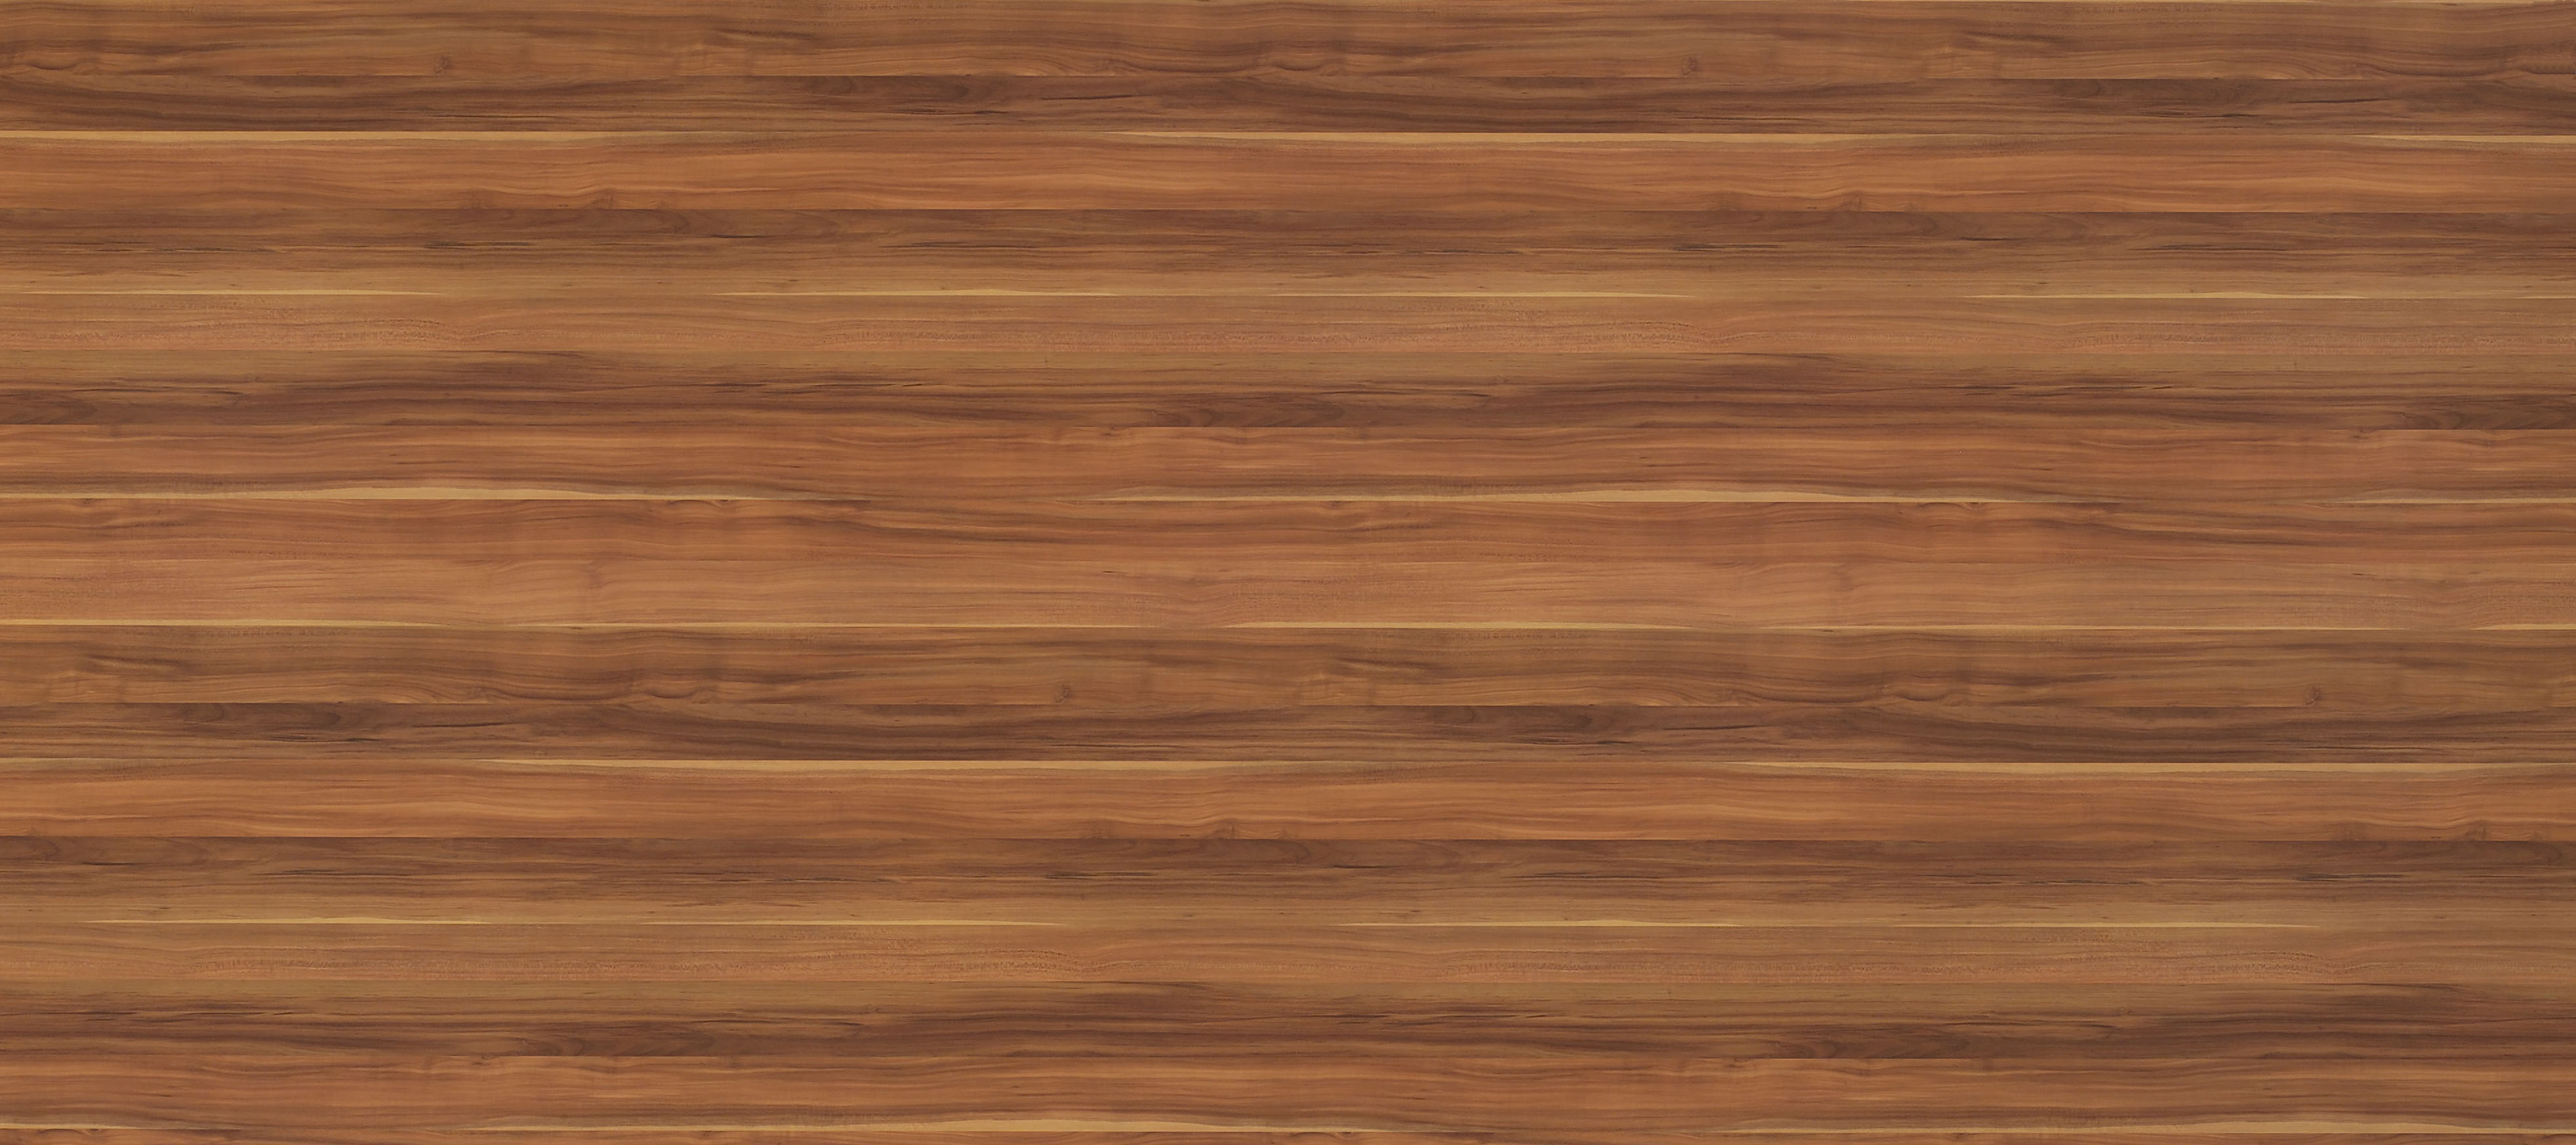 Texture wood, free download, photo, download wood texture, background